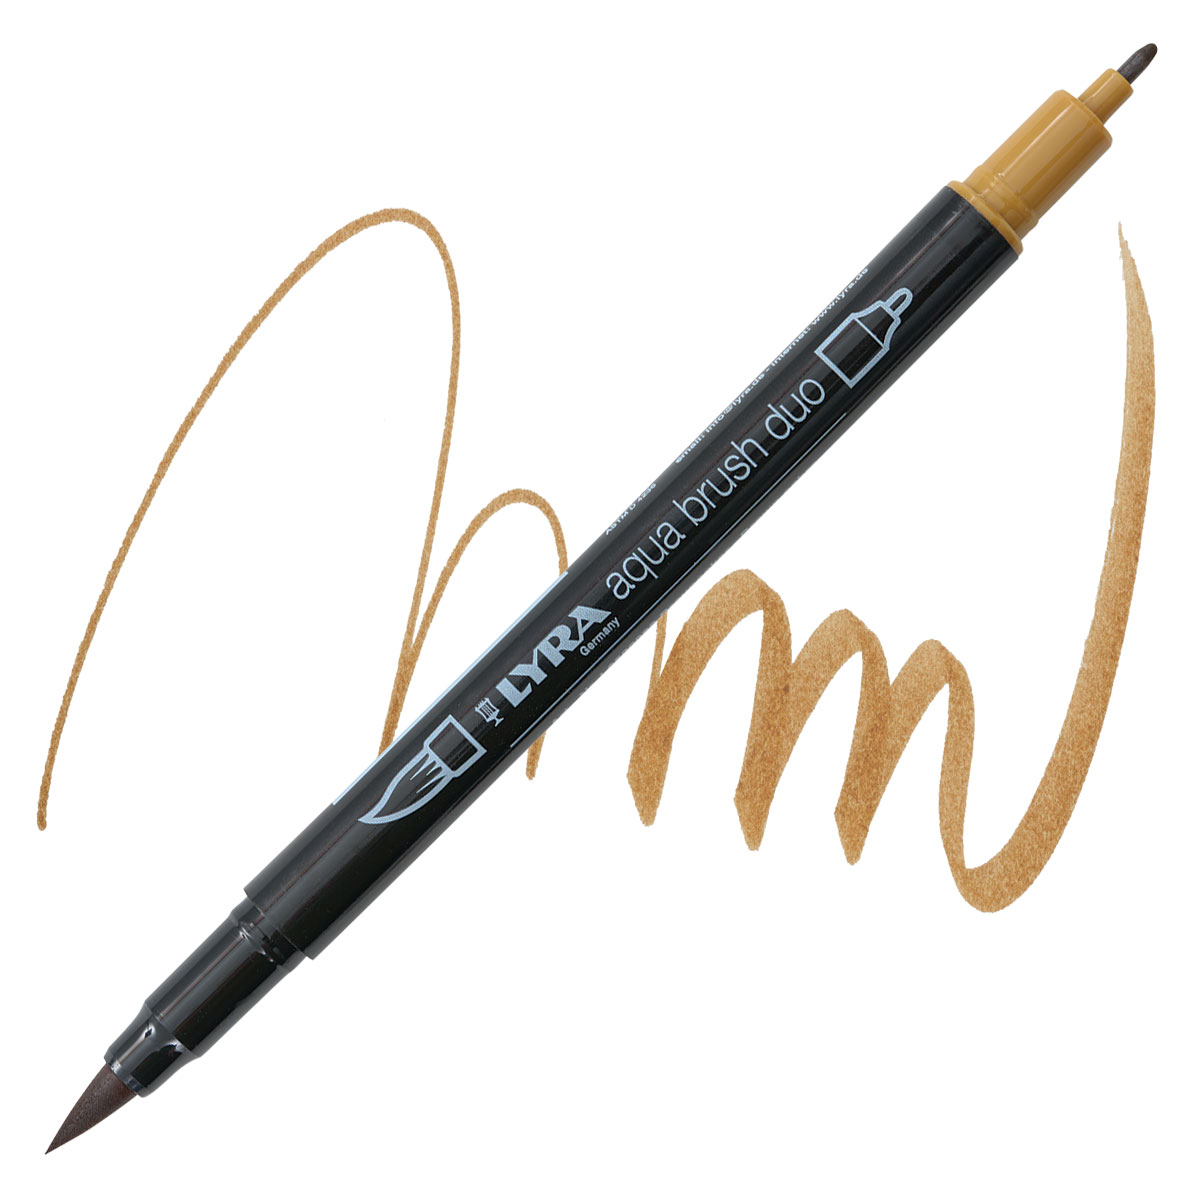 Lyra water-soluble graphite crayons – St. Louis Art Supply